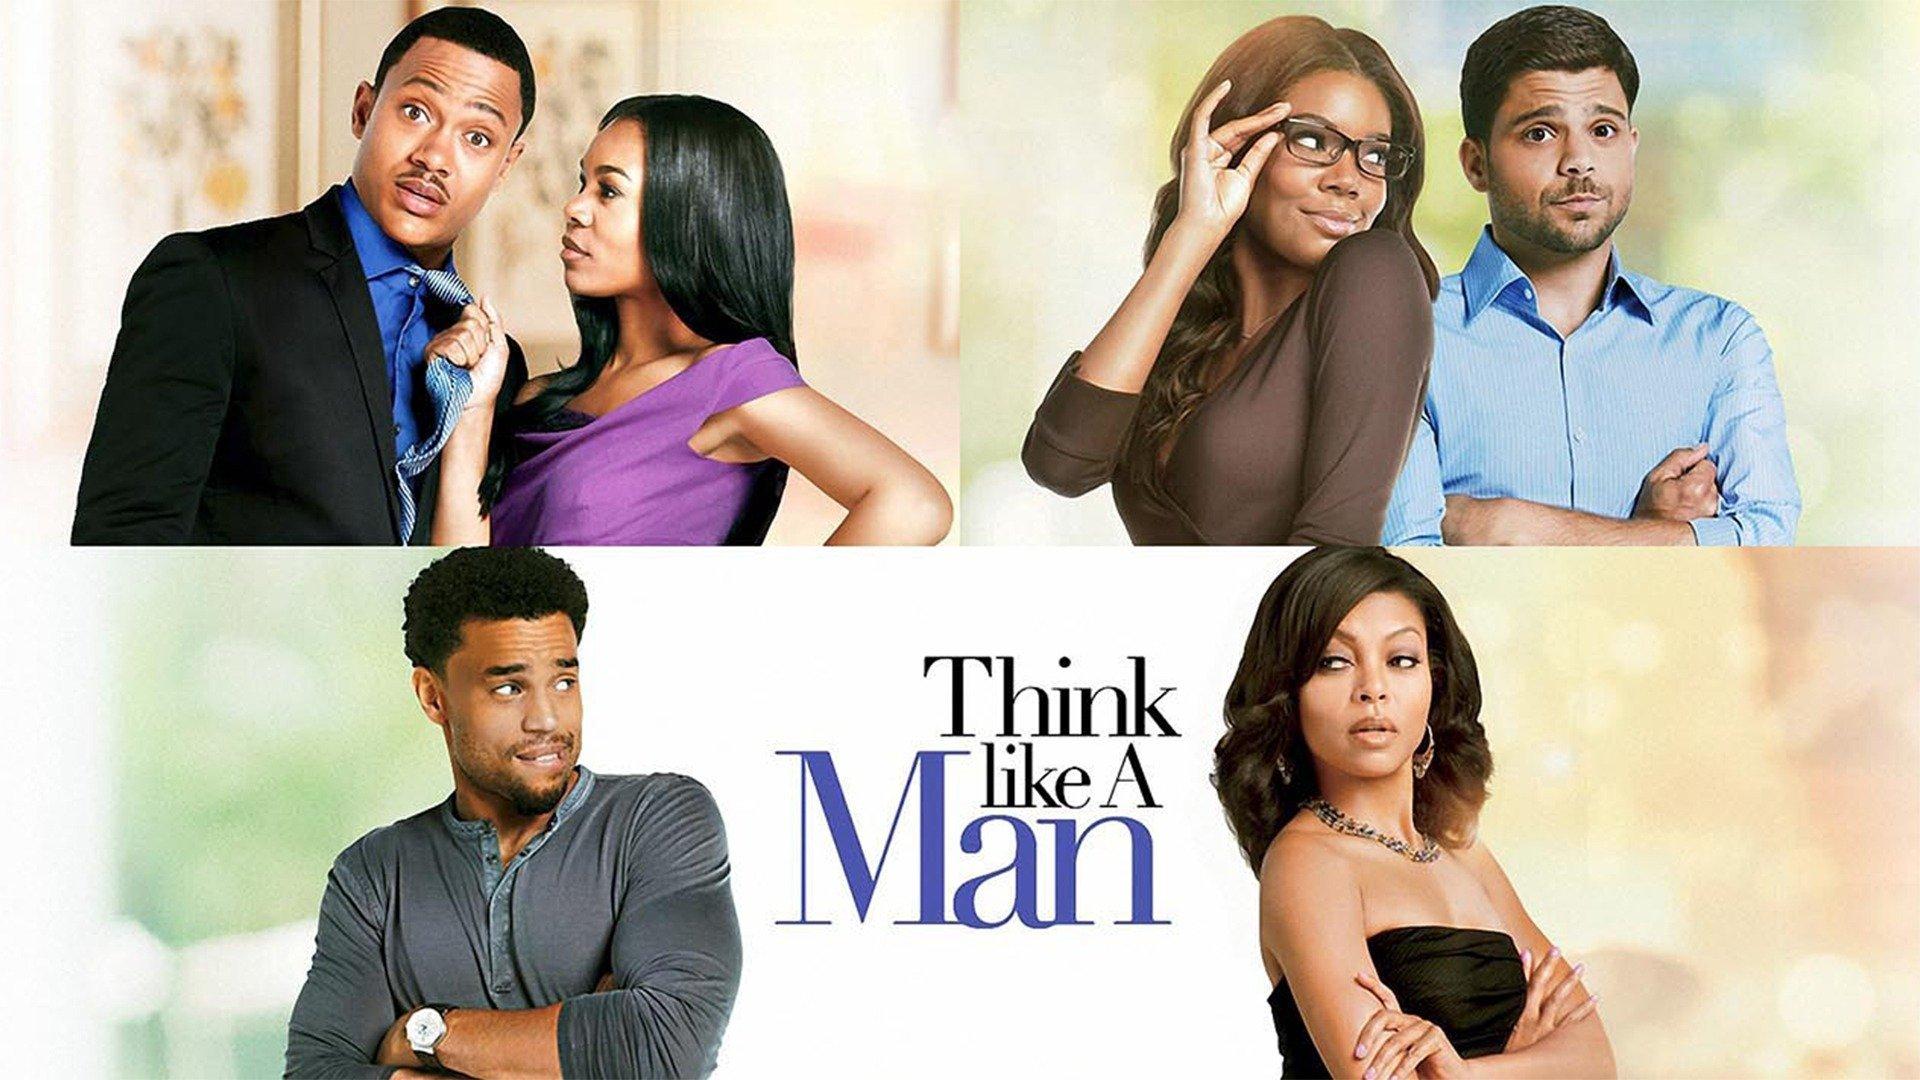 Think like a man. Think like a man watch from Одноклассники.